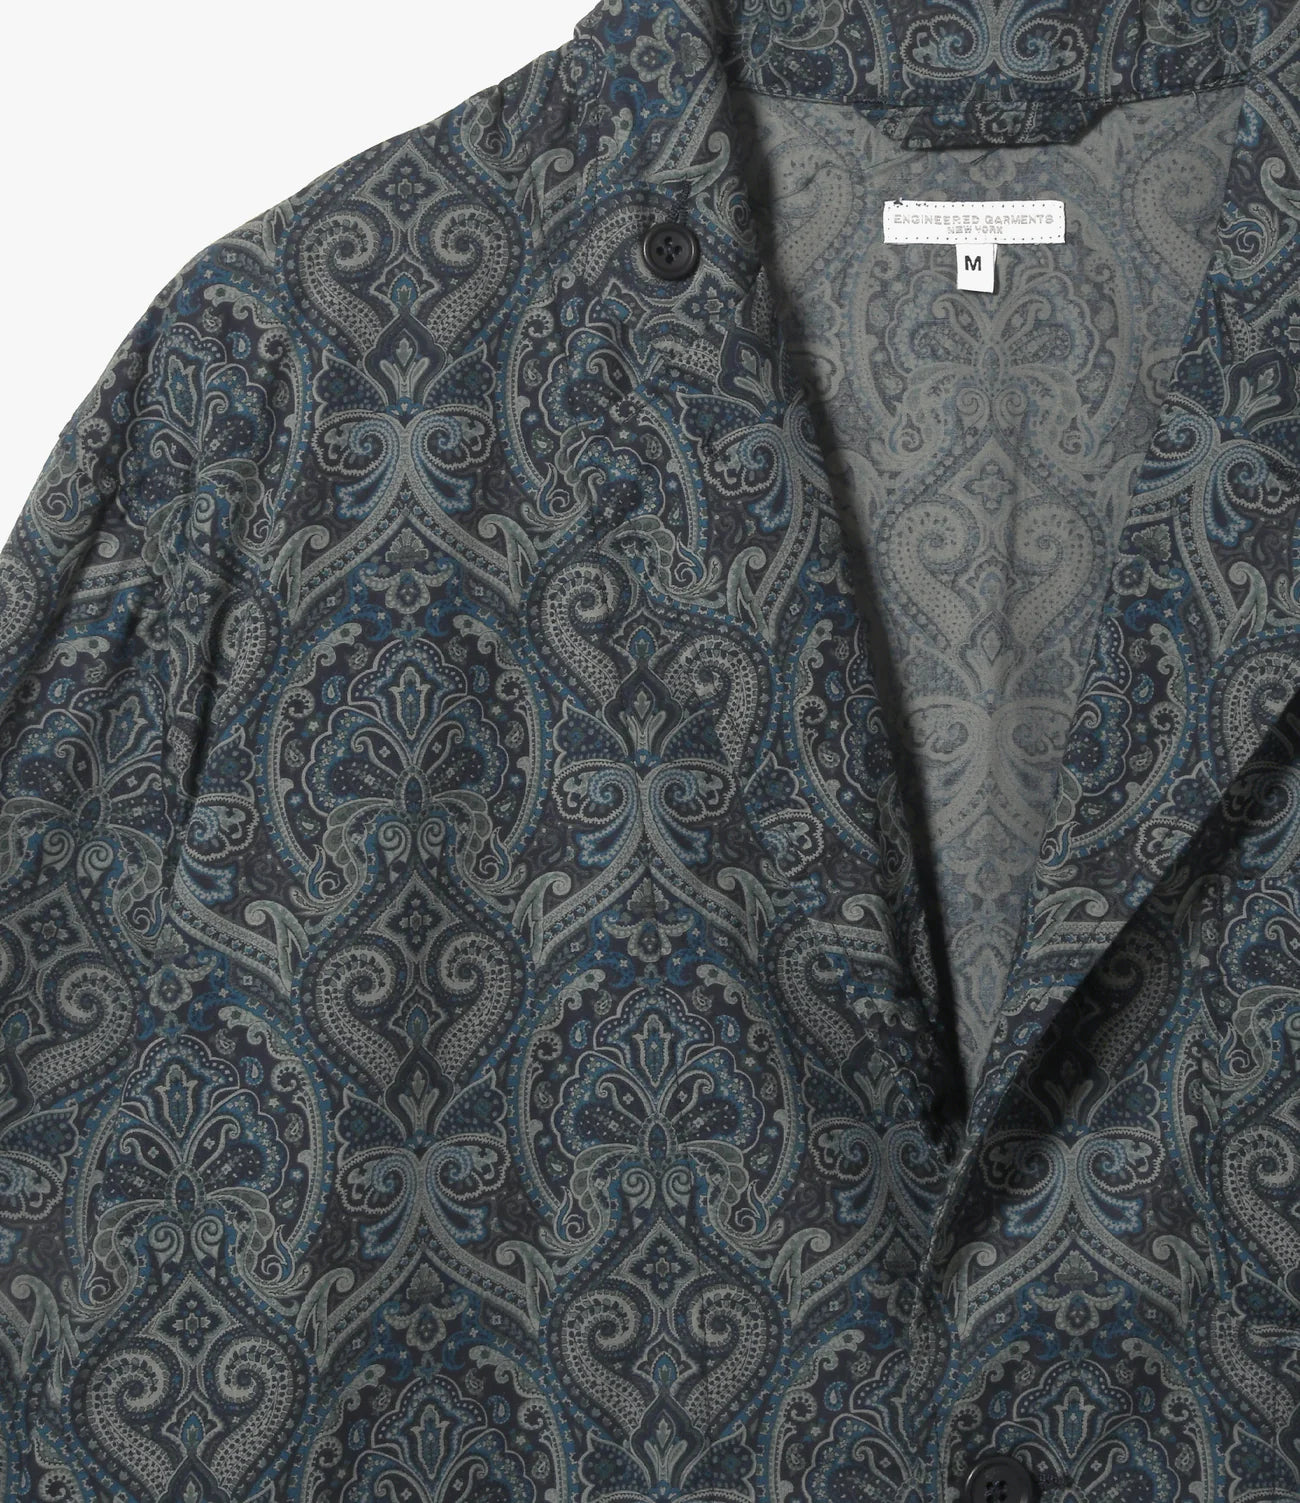 Engineered Garments Nepenthes SP Loiter Jacket - Navy Cotton Paisley Print